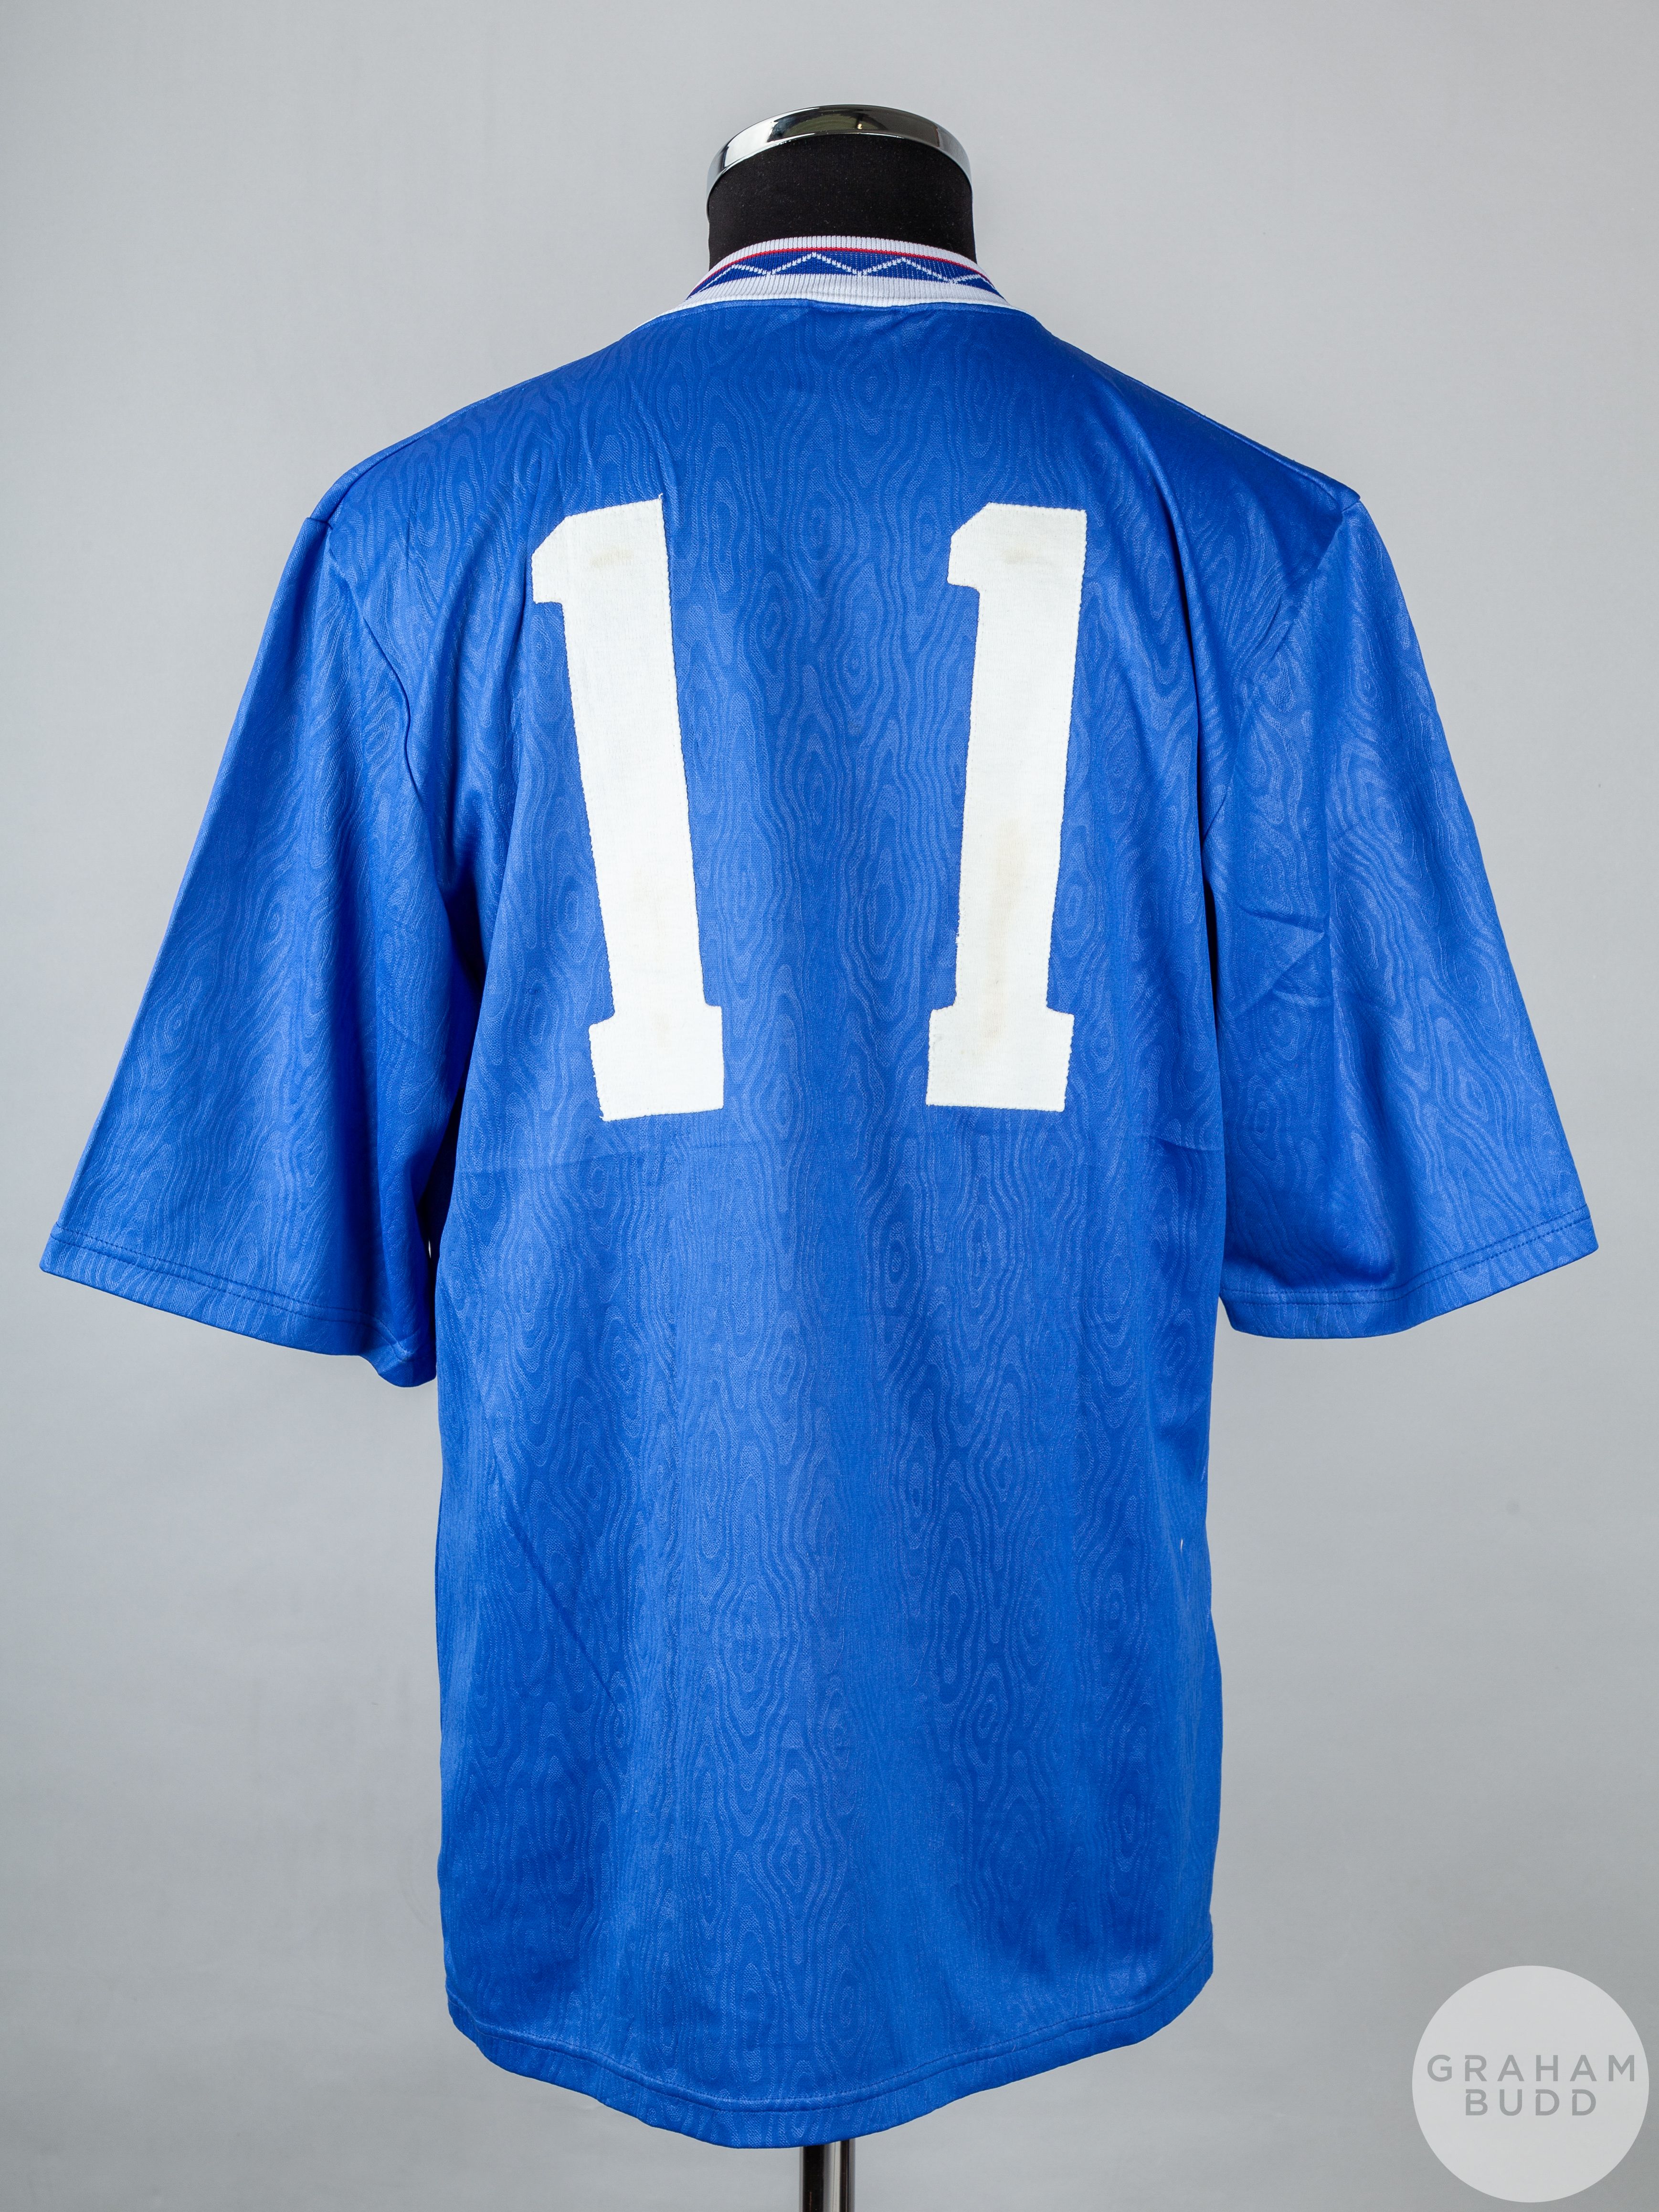 Blue and white No.11 Rangers v. Airdrieonians Scottish Cup Final shirt - Image 2 of 4